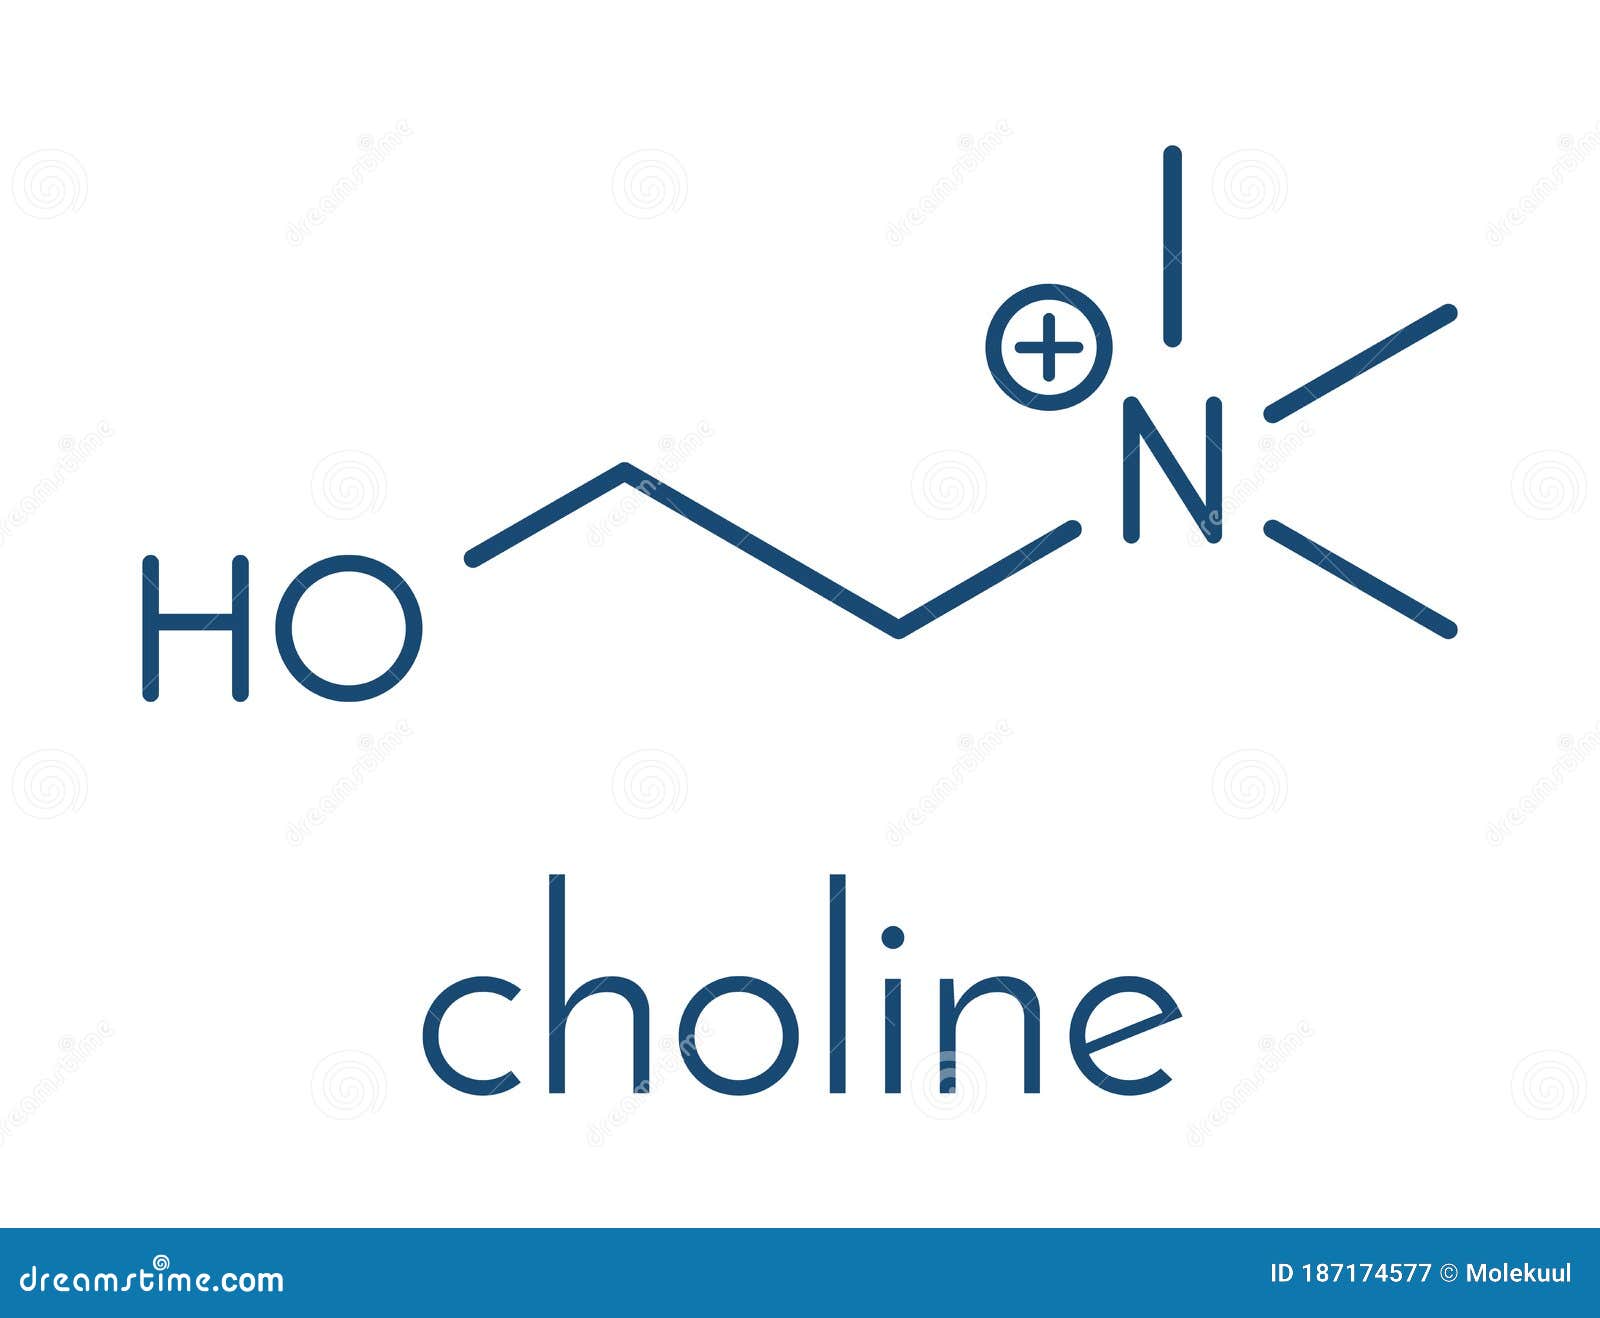 Choline Molecule, Structural Chemical Formula, Ball-and-stick Model ...